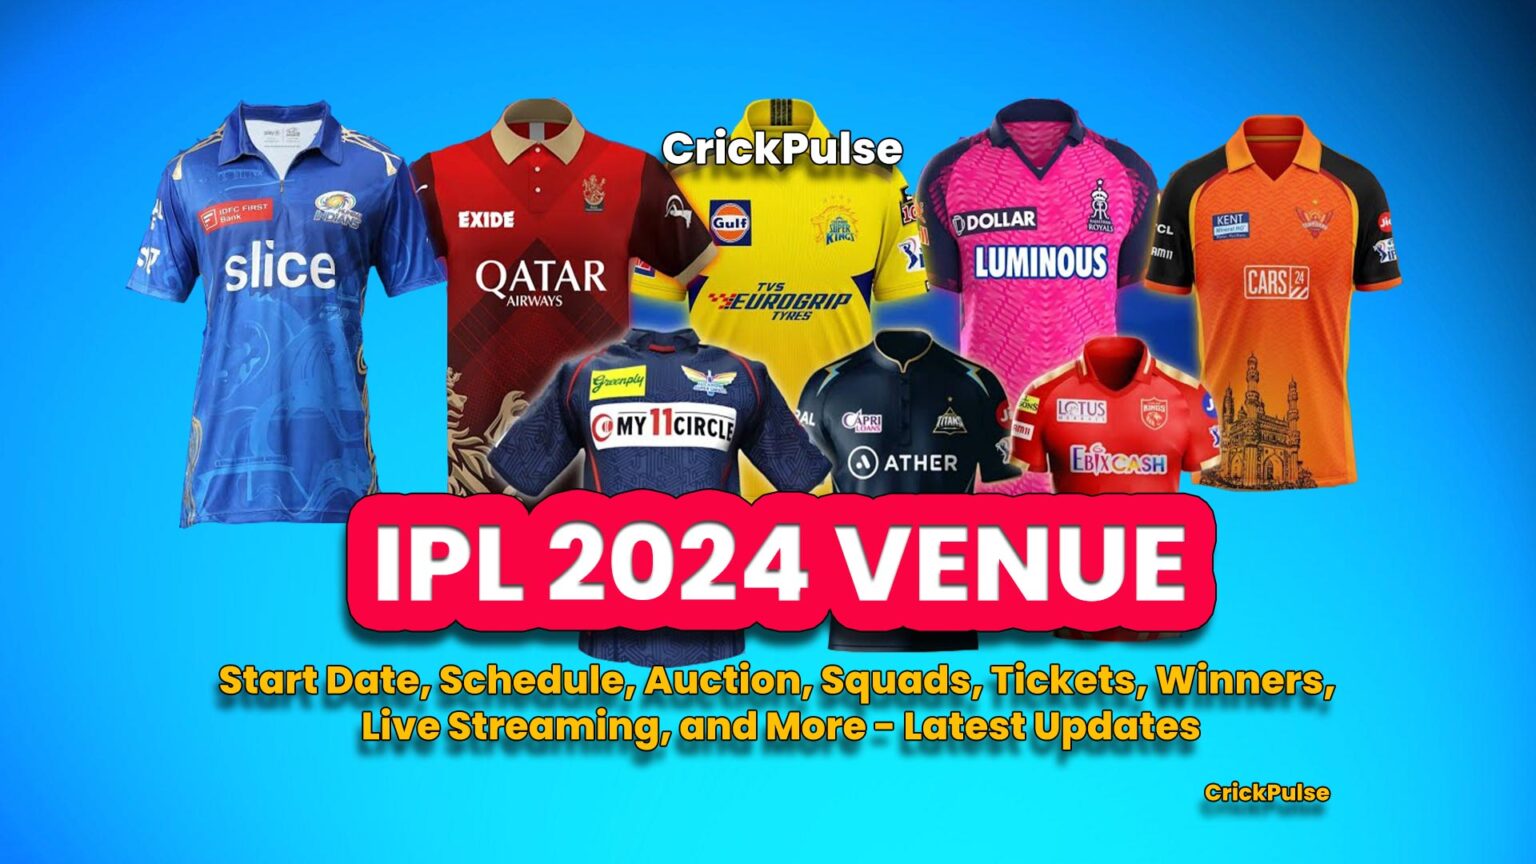 IPL 2024 Venue and All Matches Locations For IPL in India CrickPulse